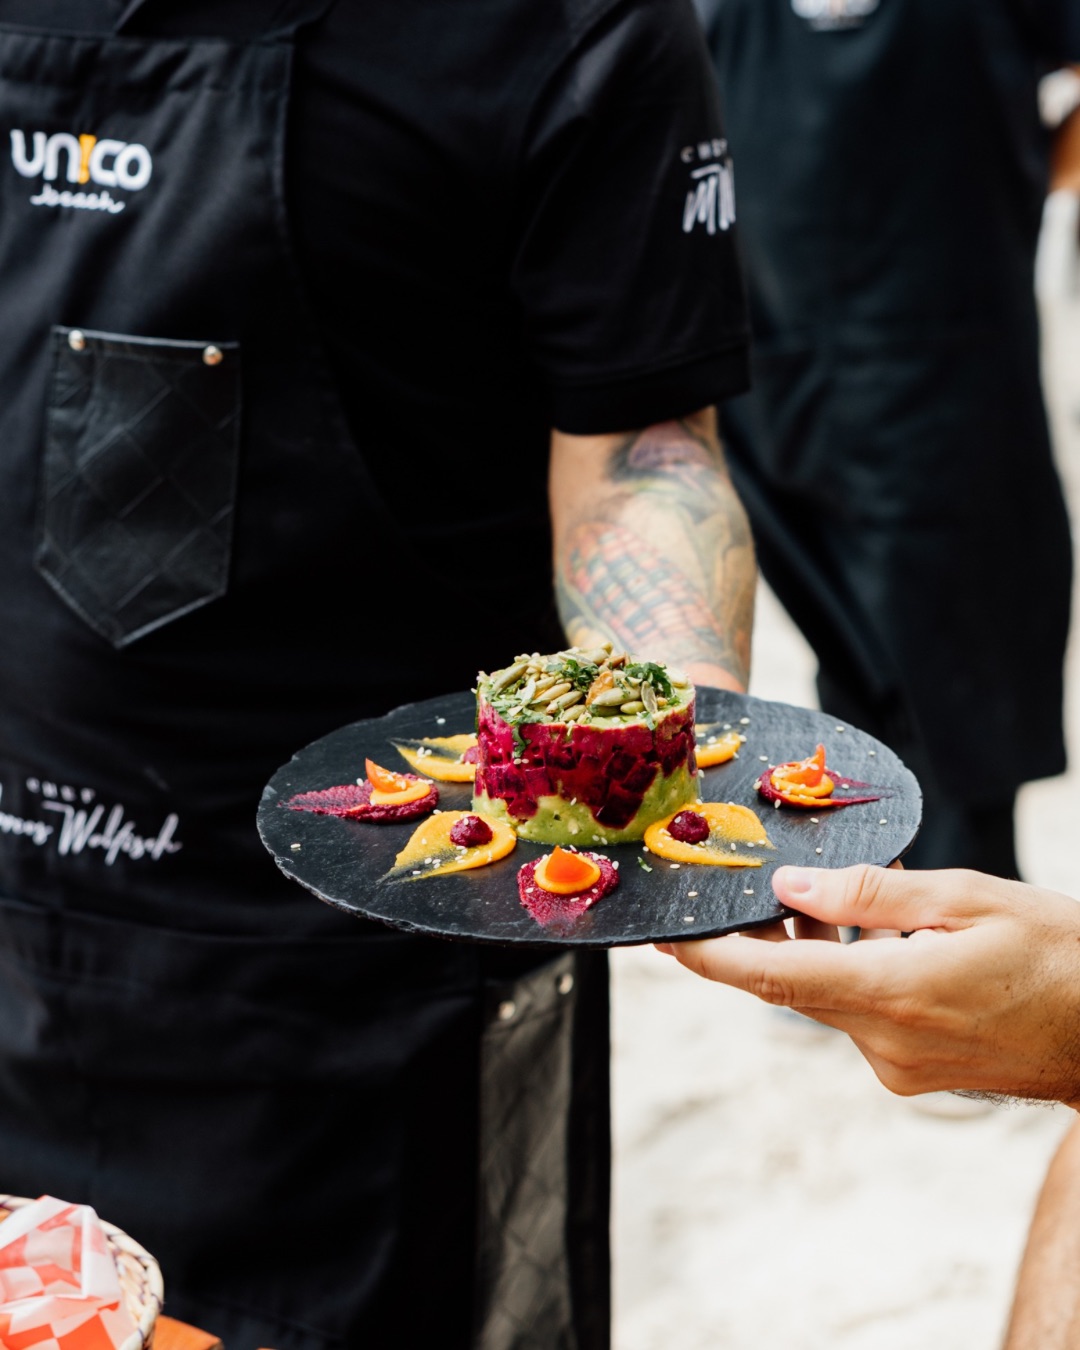 Chef Marcos Walfisch holding a plate of his delicious beet guacamole at Unico Beach Club.